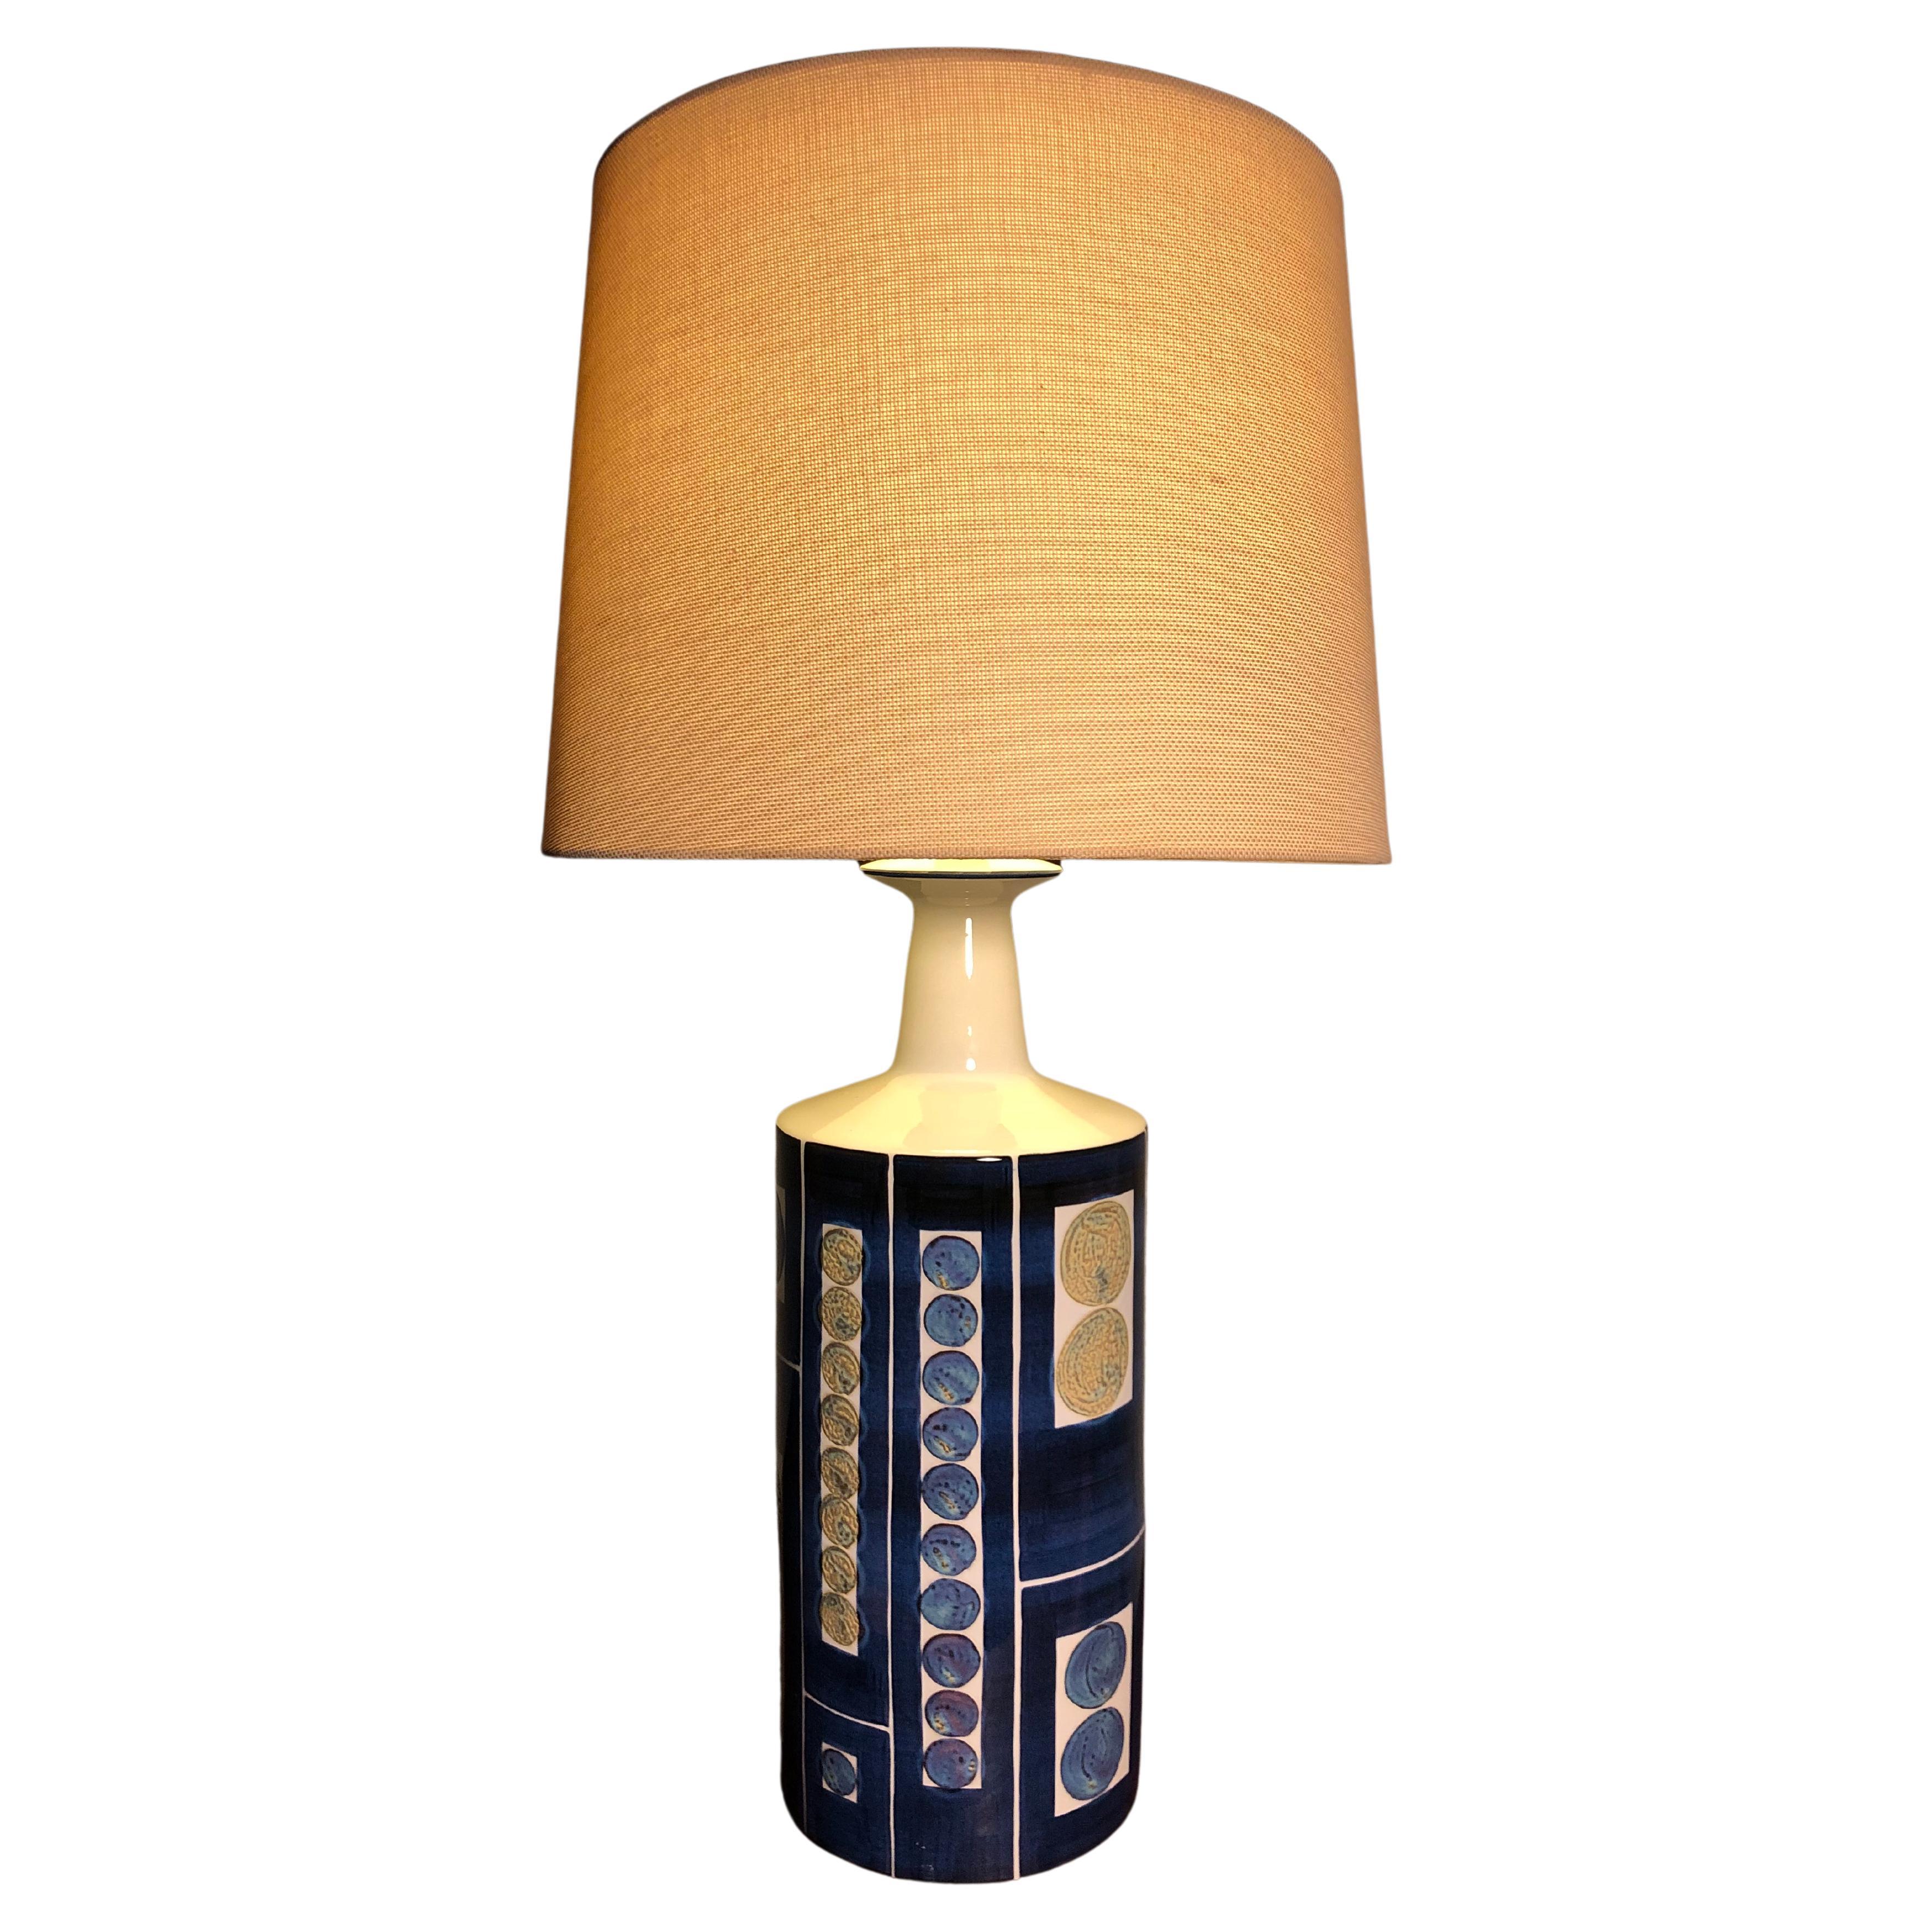 Gorgeous Mid-Century Pottery Table Lamp by Fog & Mørup